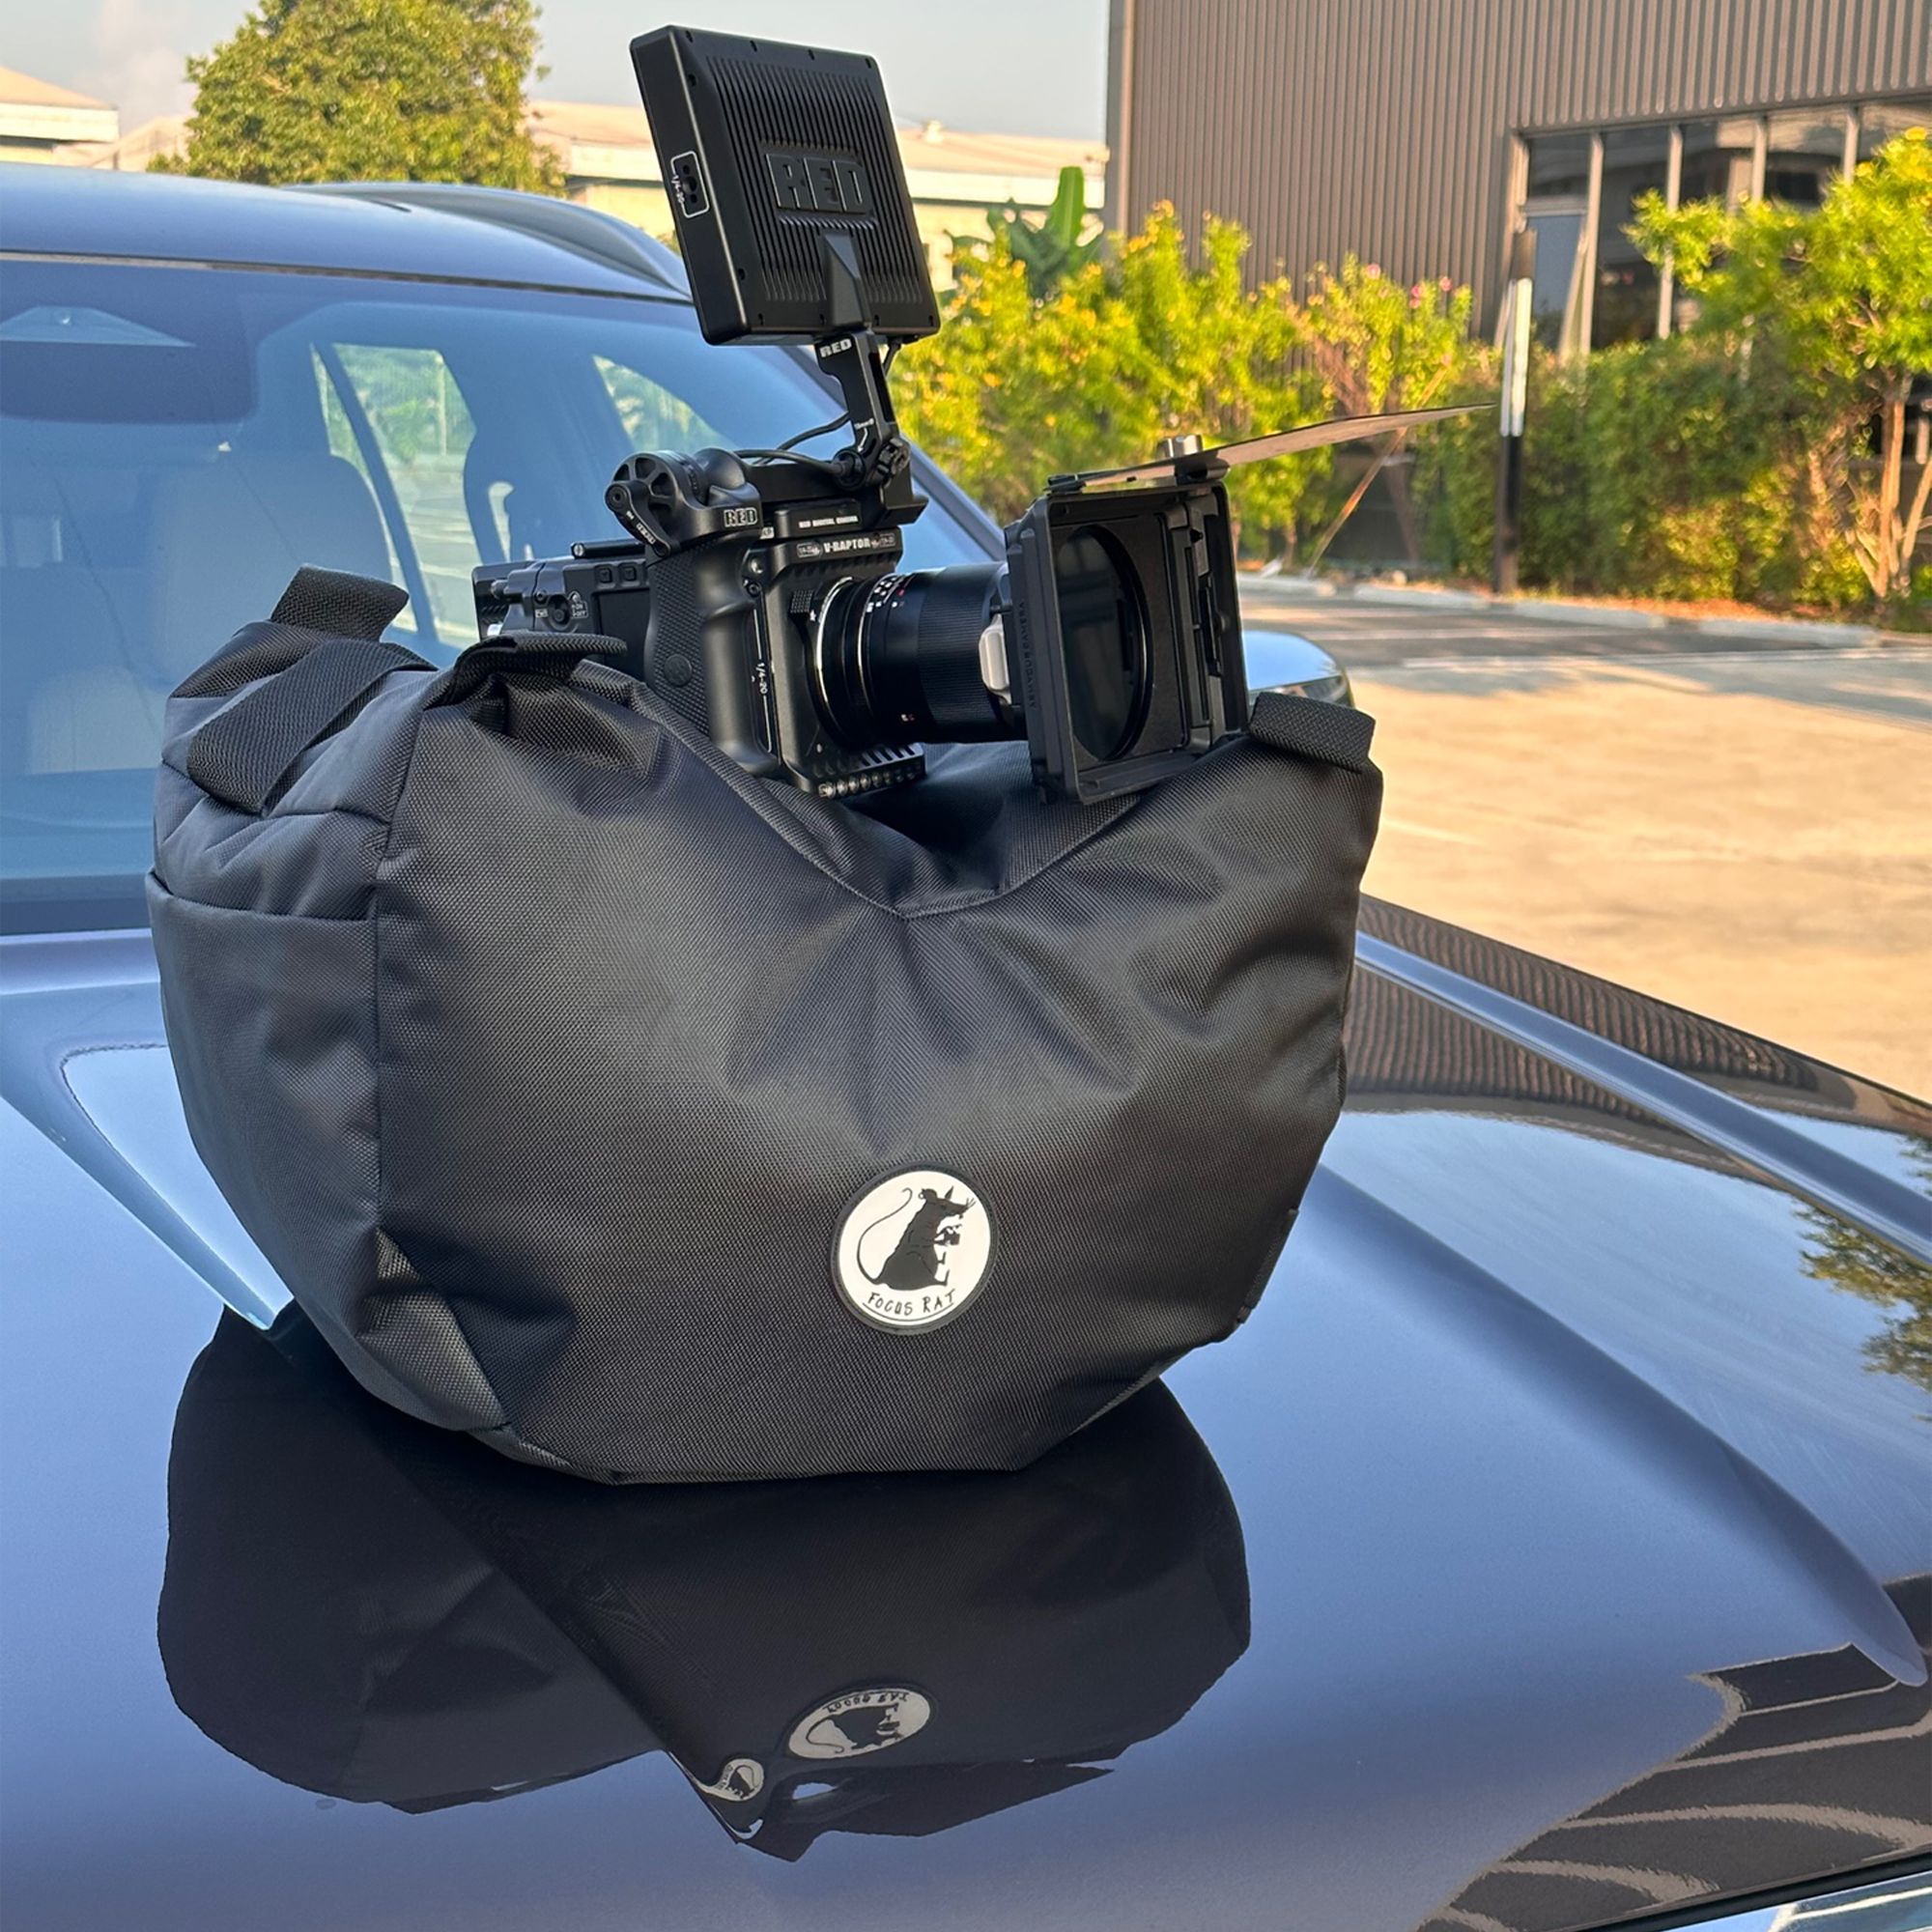 Customizable Professional Steady bag (Steady Saddle) Large Bag True Black with a red camera on top, and the whole setup on the hood of a nice car